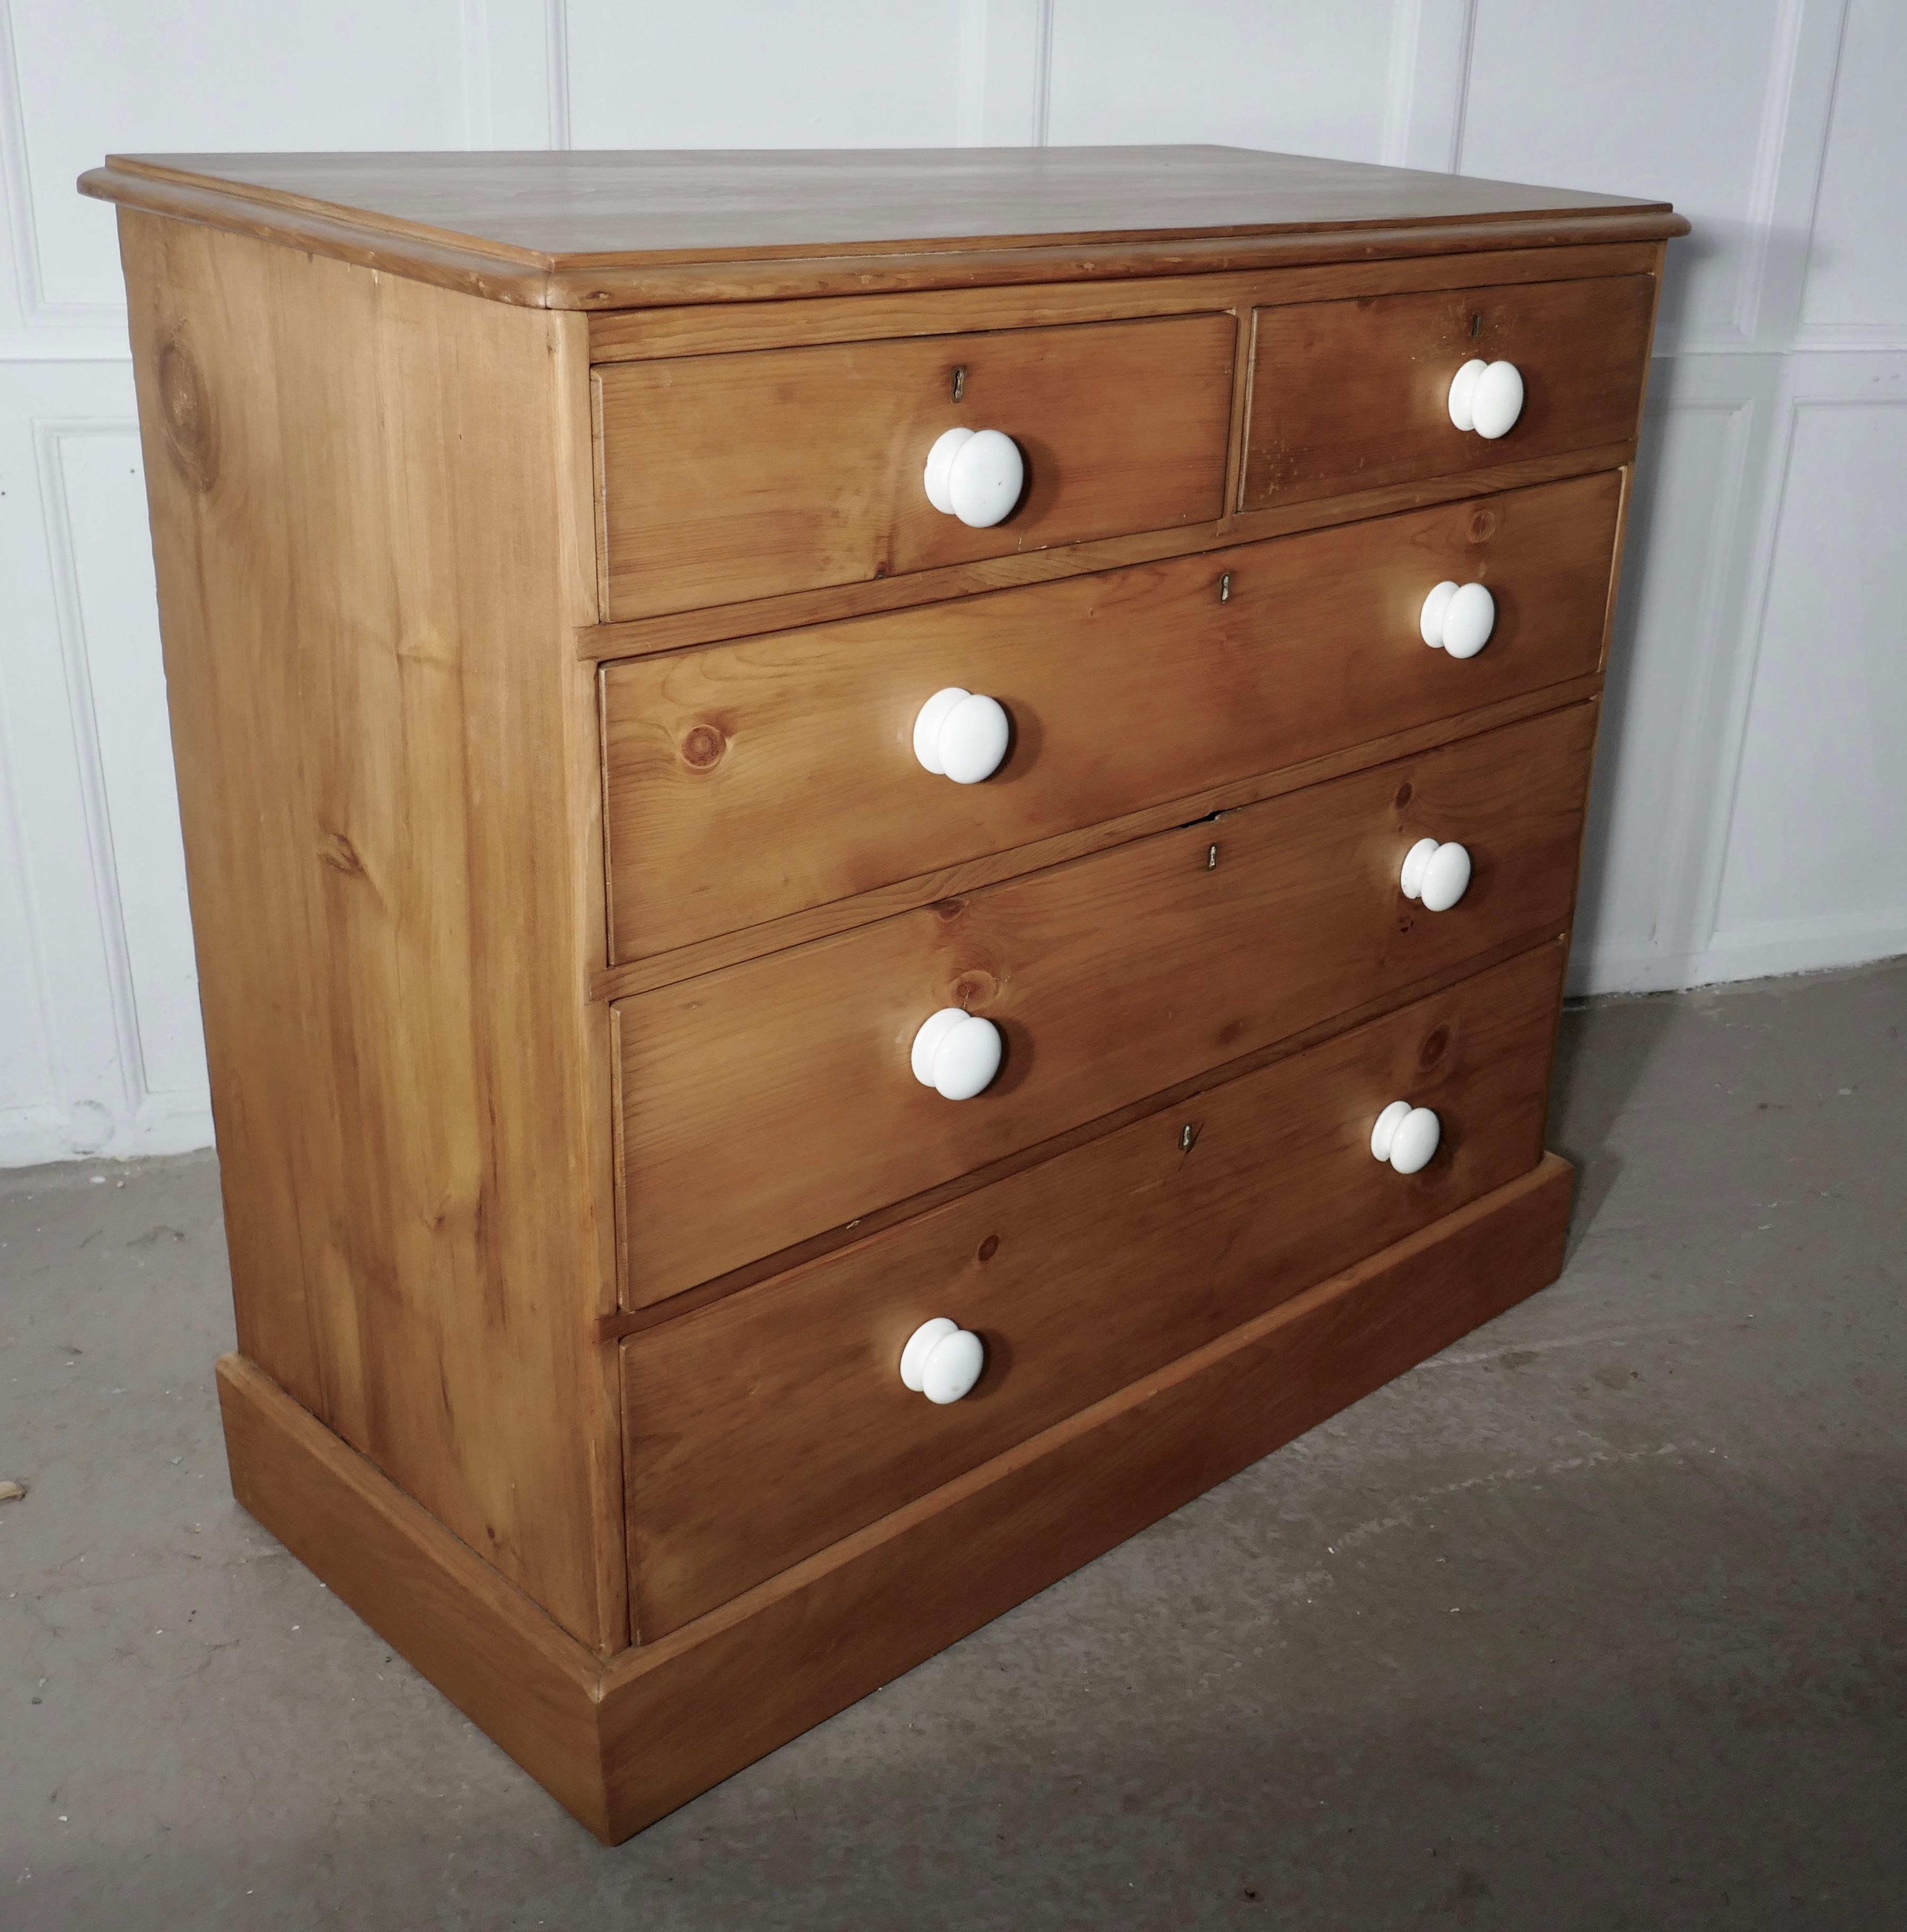 Victorian pine chest of drawers

Victorian pine chest of drawers dates from 1890 it has been stripped and waxed.
This is a very good quality pine chest, the large five-drawer version like this one is becoming a lot less common these days
The